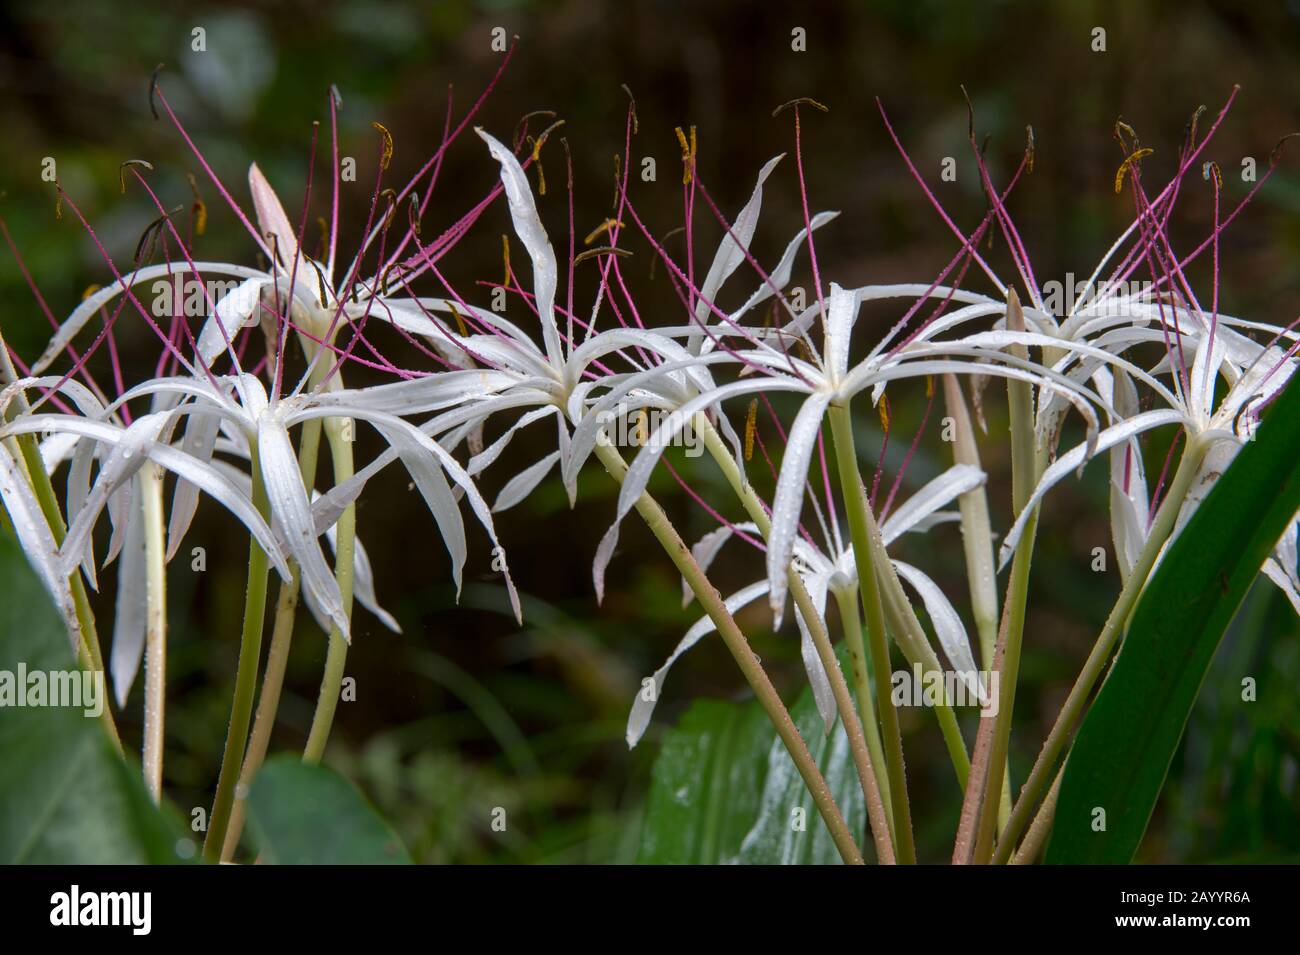 Spider Lily flowers with water drops (Amaryllidaceae family) at Perinet Reserve, Madagascar. Stock Photo